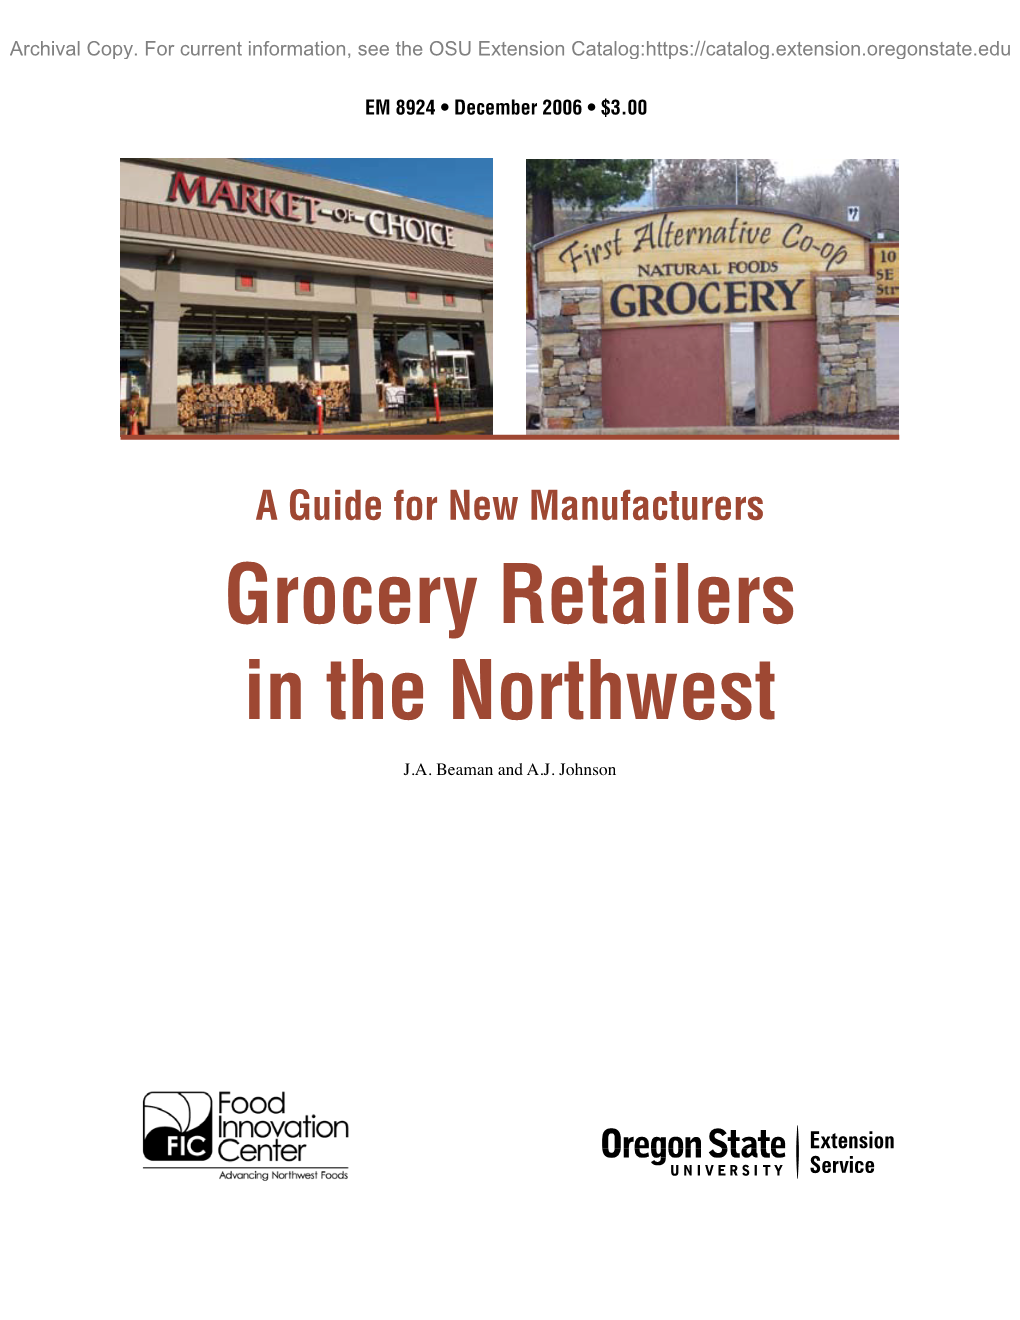 Grocery Retailers in the Northwest: a Guide For